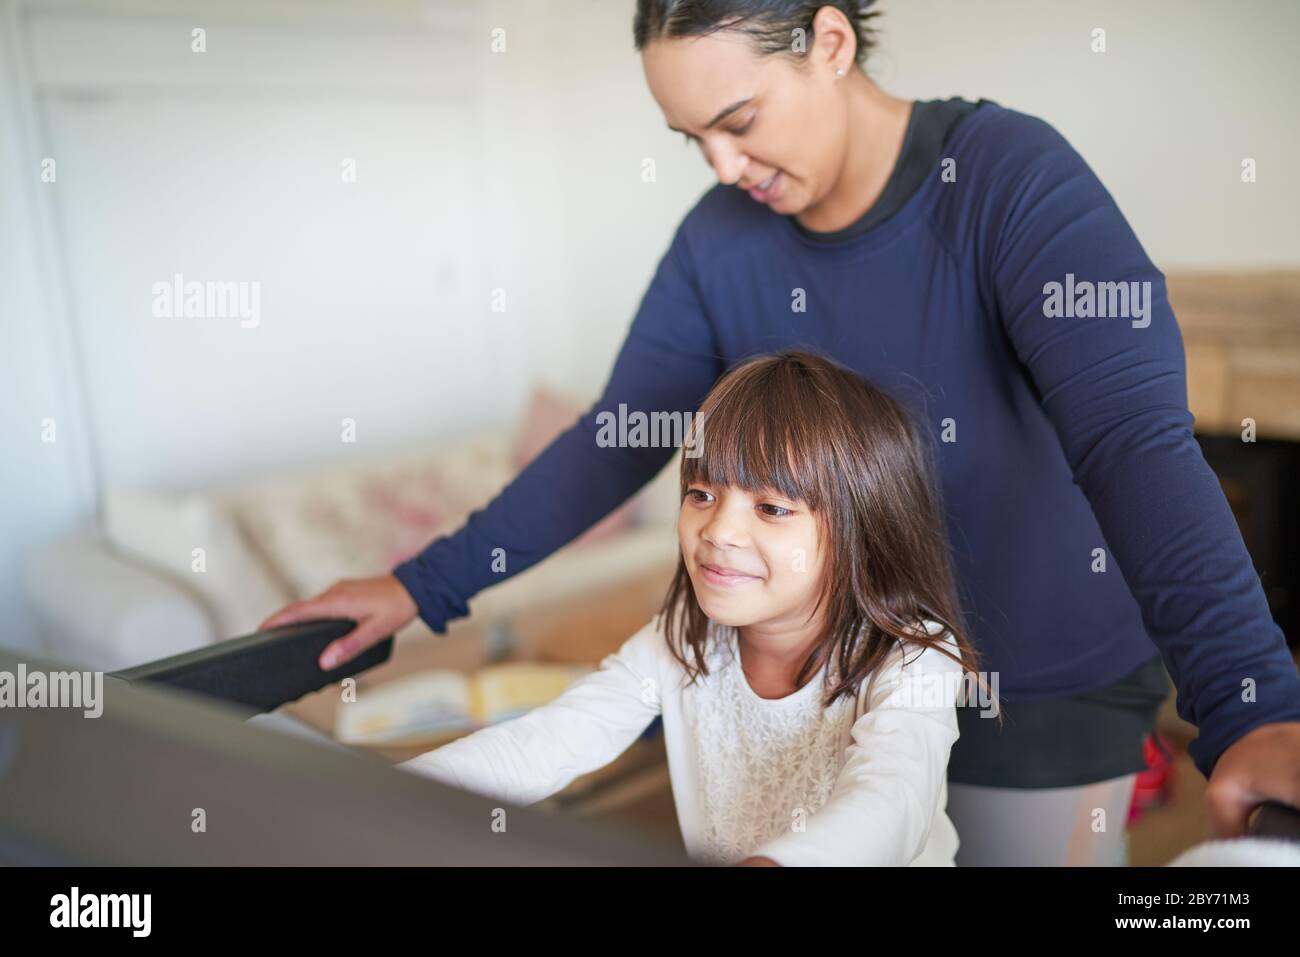 Mother and daughter on treadmill Stock Photo